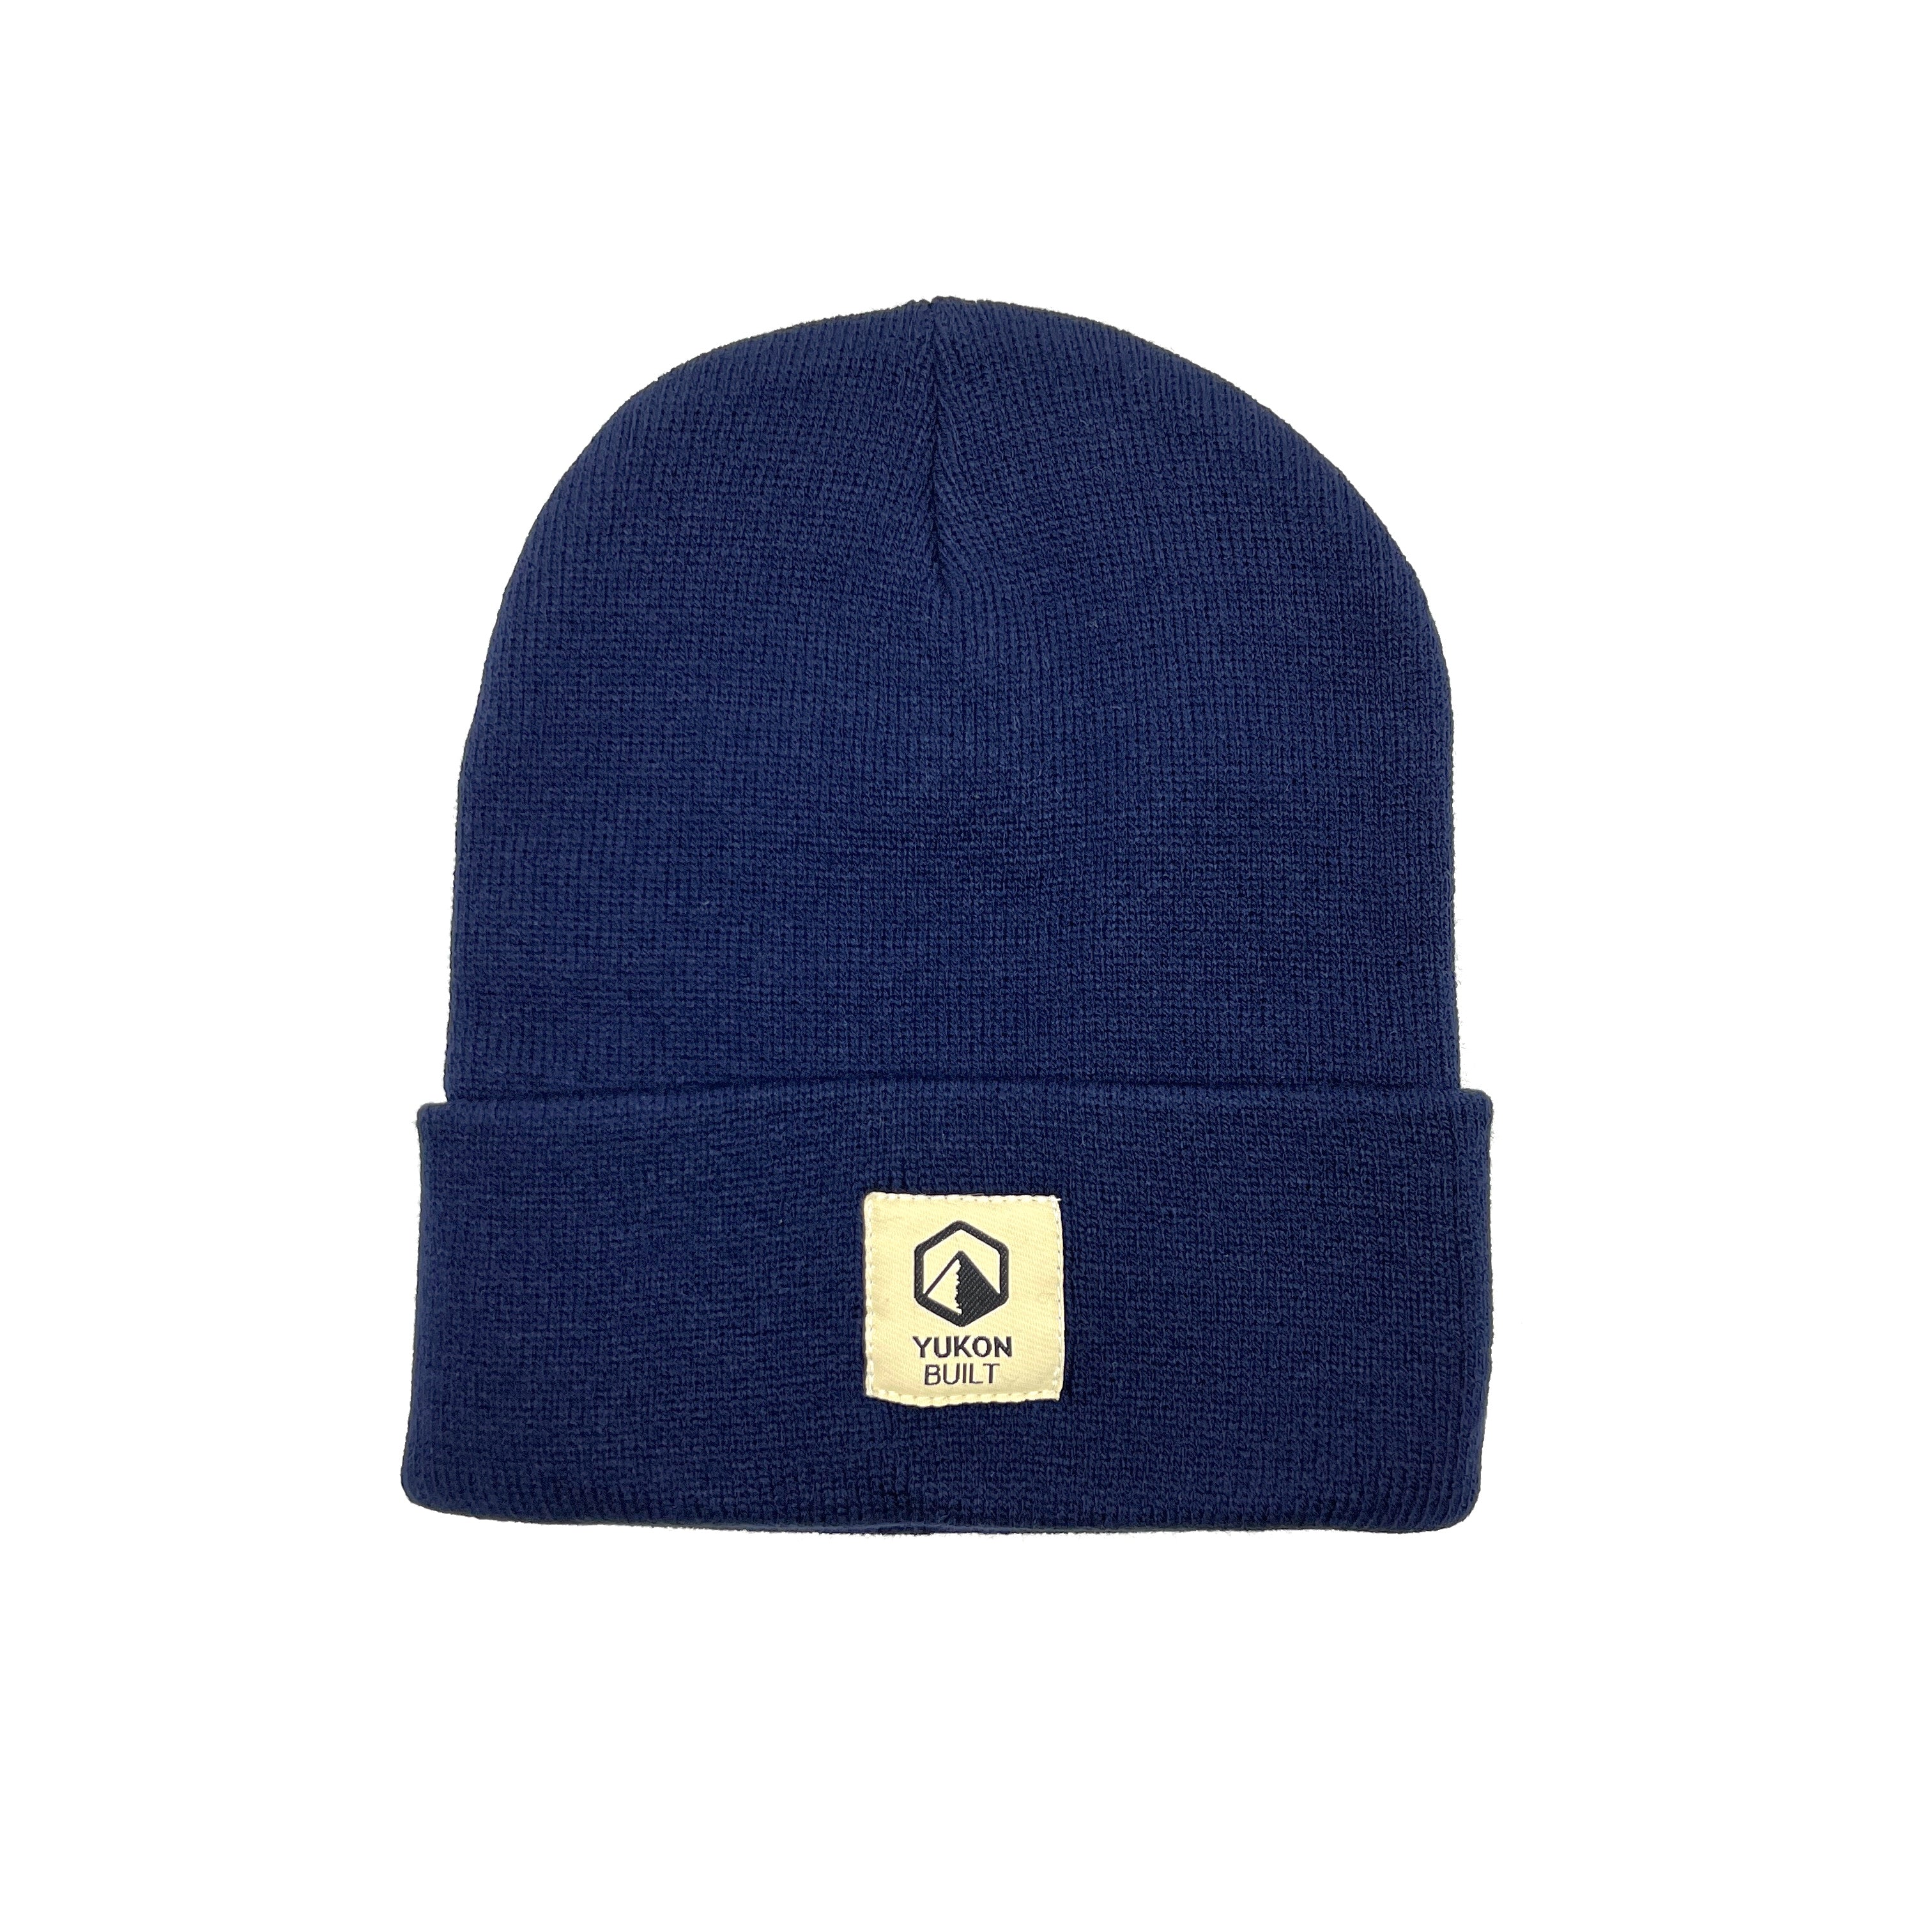 Brand New Old Navy Beanie Hat - general for sale - by owner